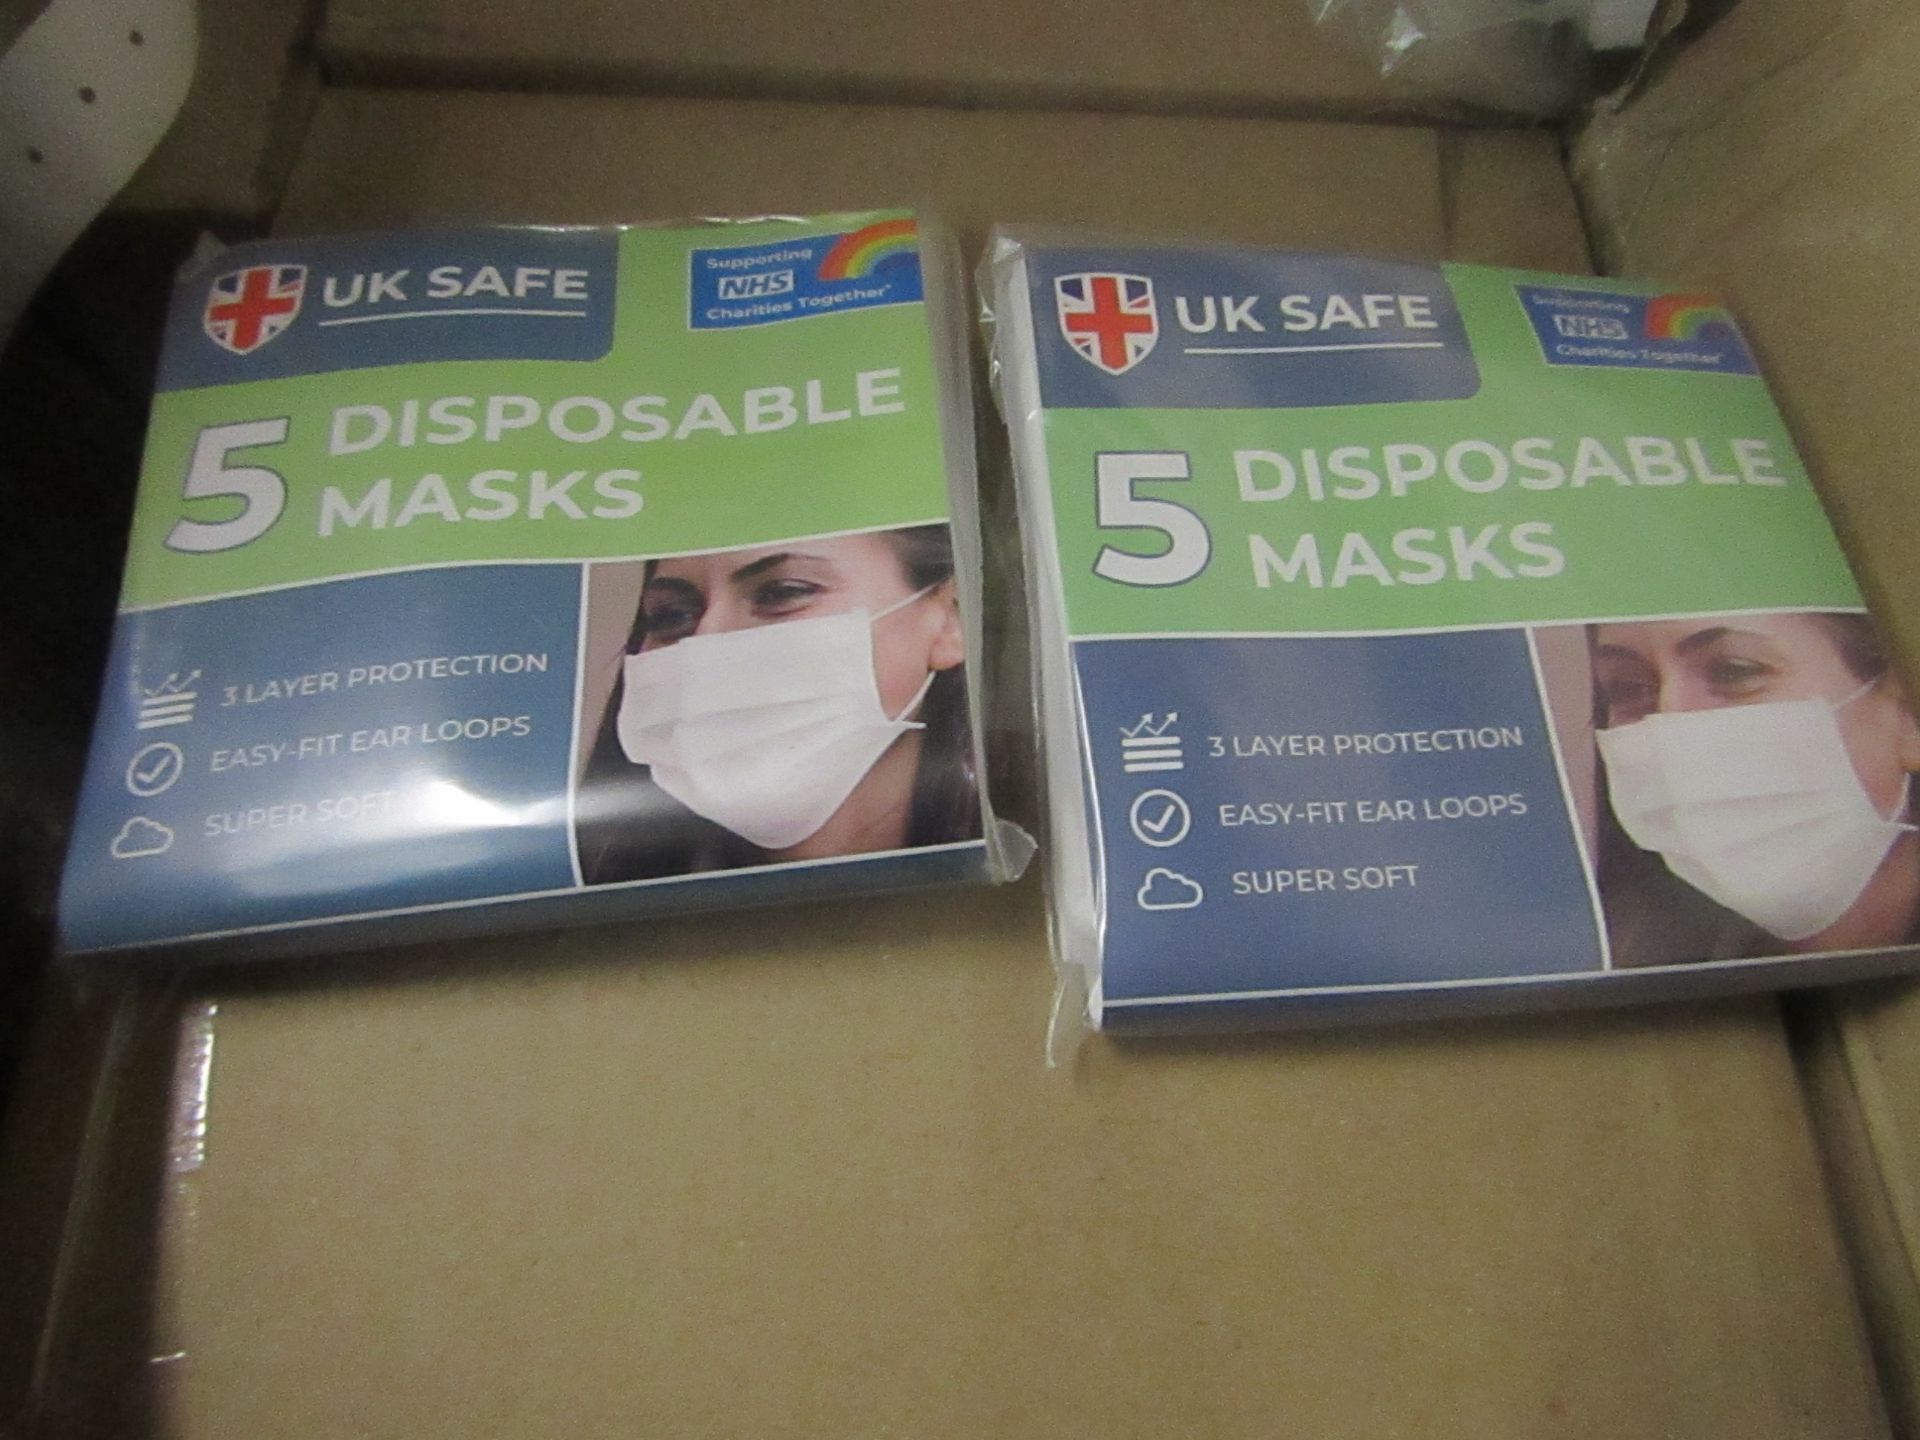 10x Packs of 5x Uk Safe - Disposable masks - New & Boxed.